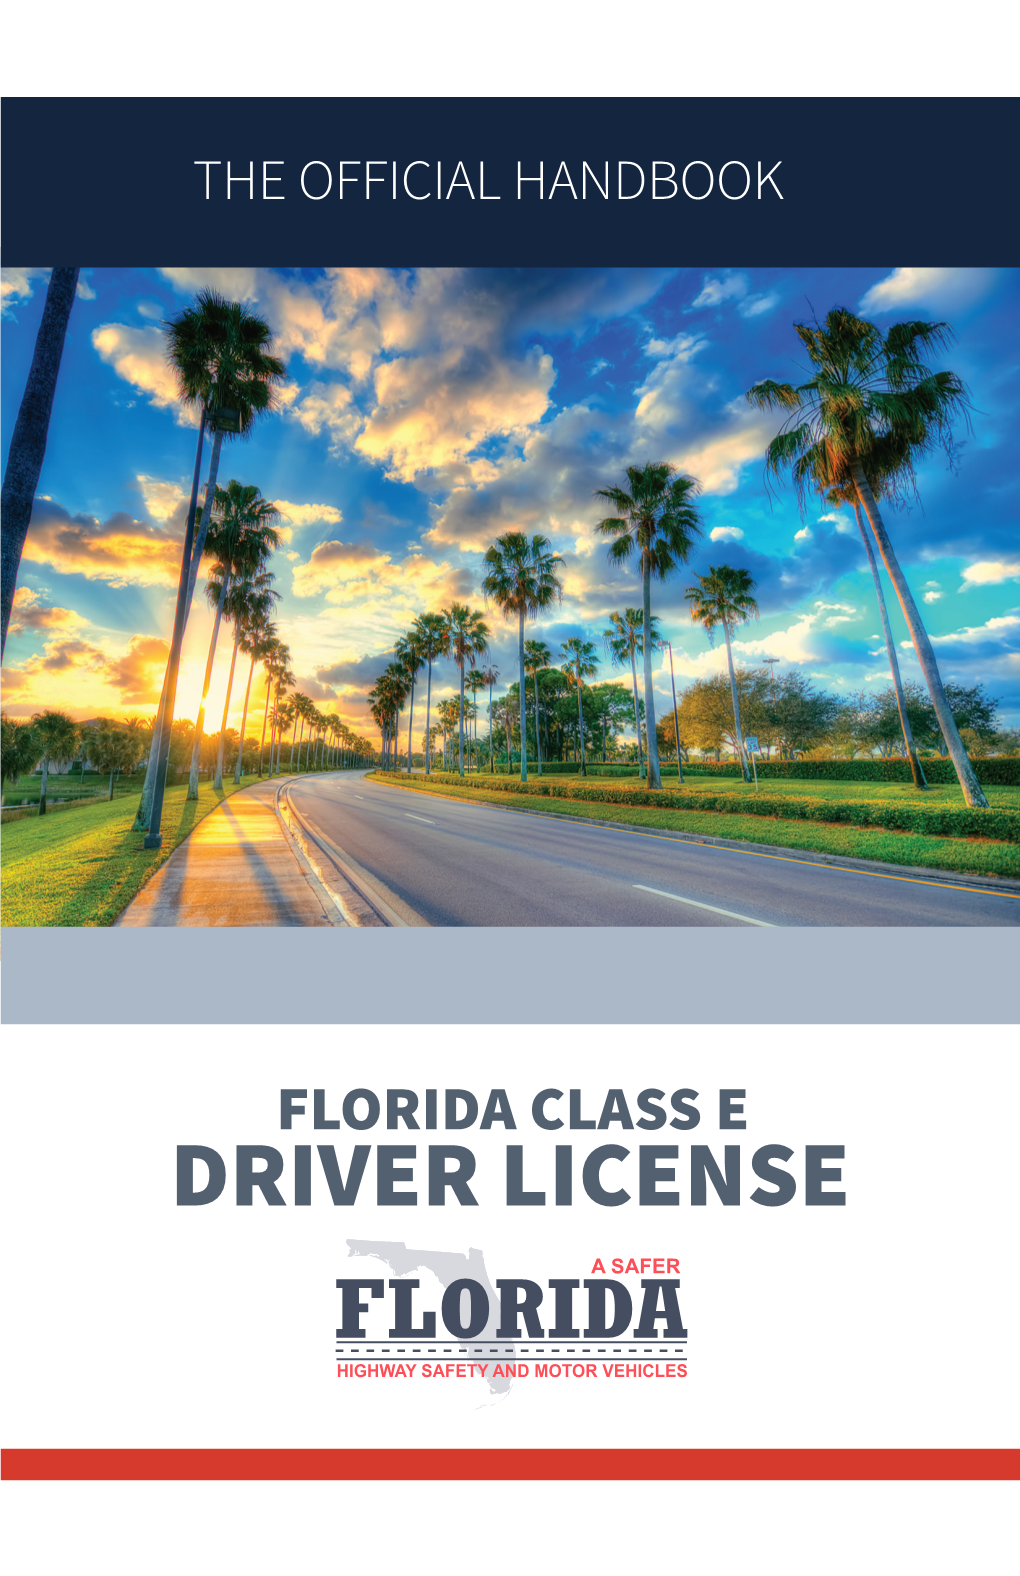 Florida Driver License Handbook Is Produced by the Florida Department of Highway Safety and Motor Vehicles (DHSMV)